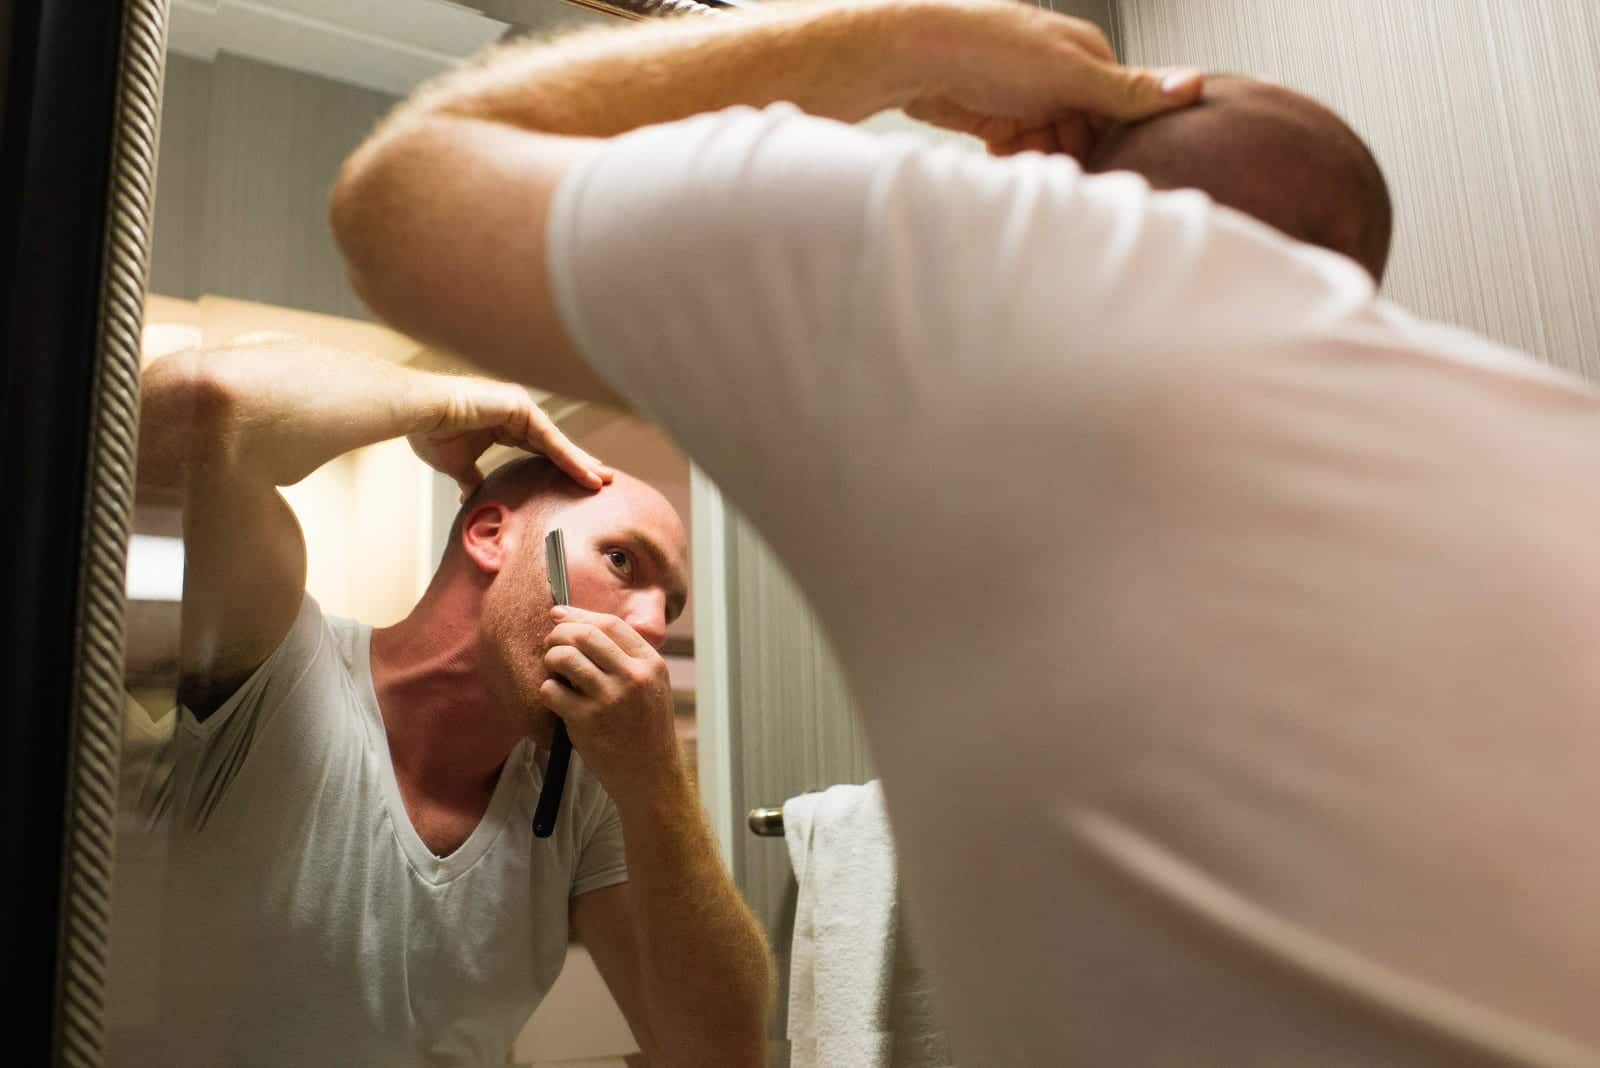 A man looks into a mirror as he uses a straight razor to shave his beard.